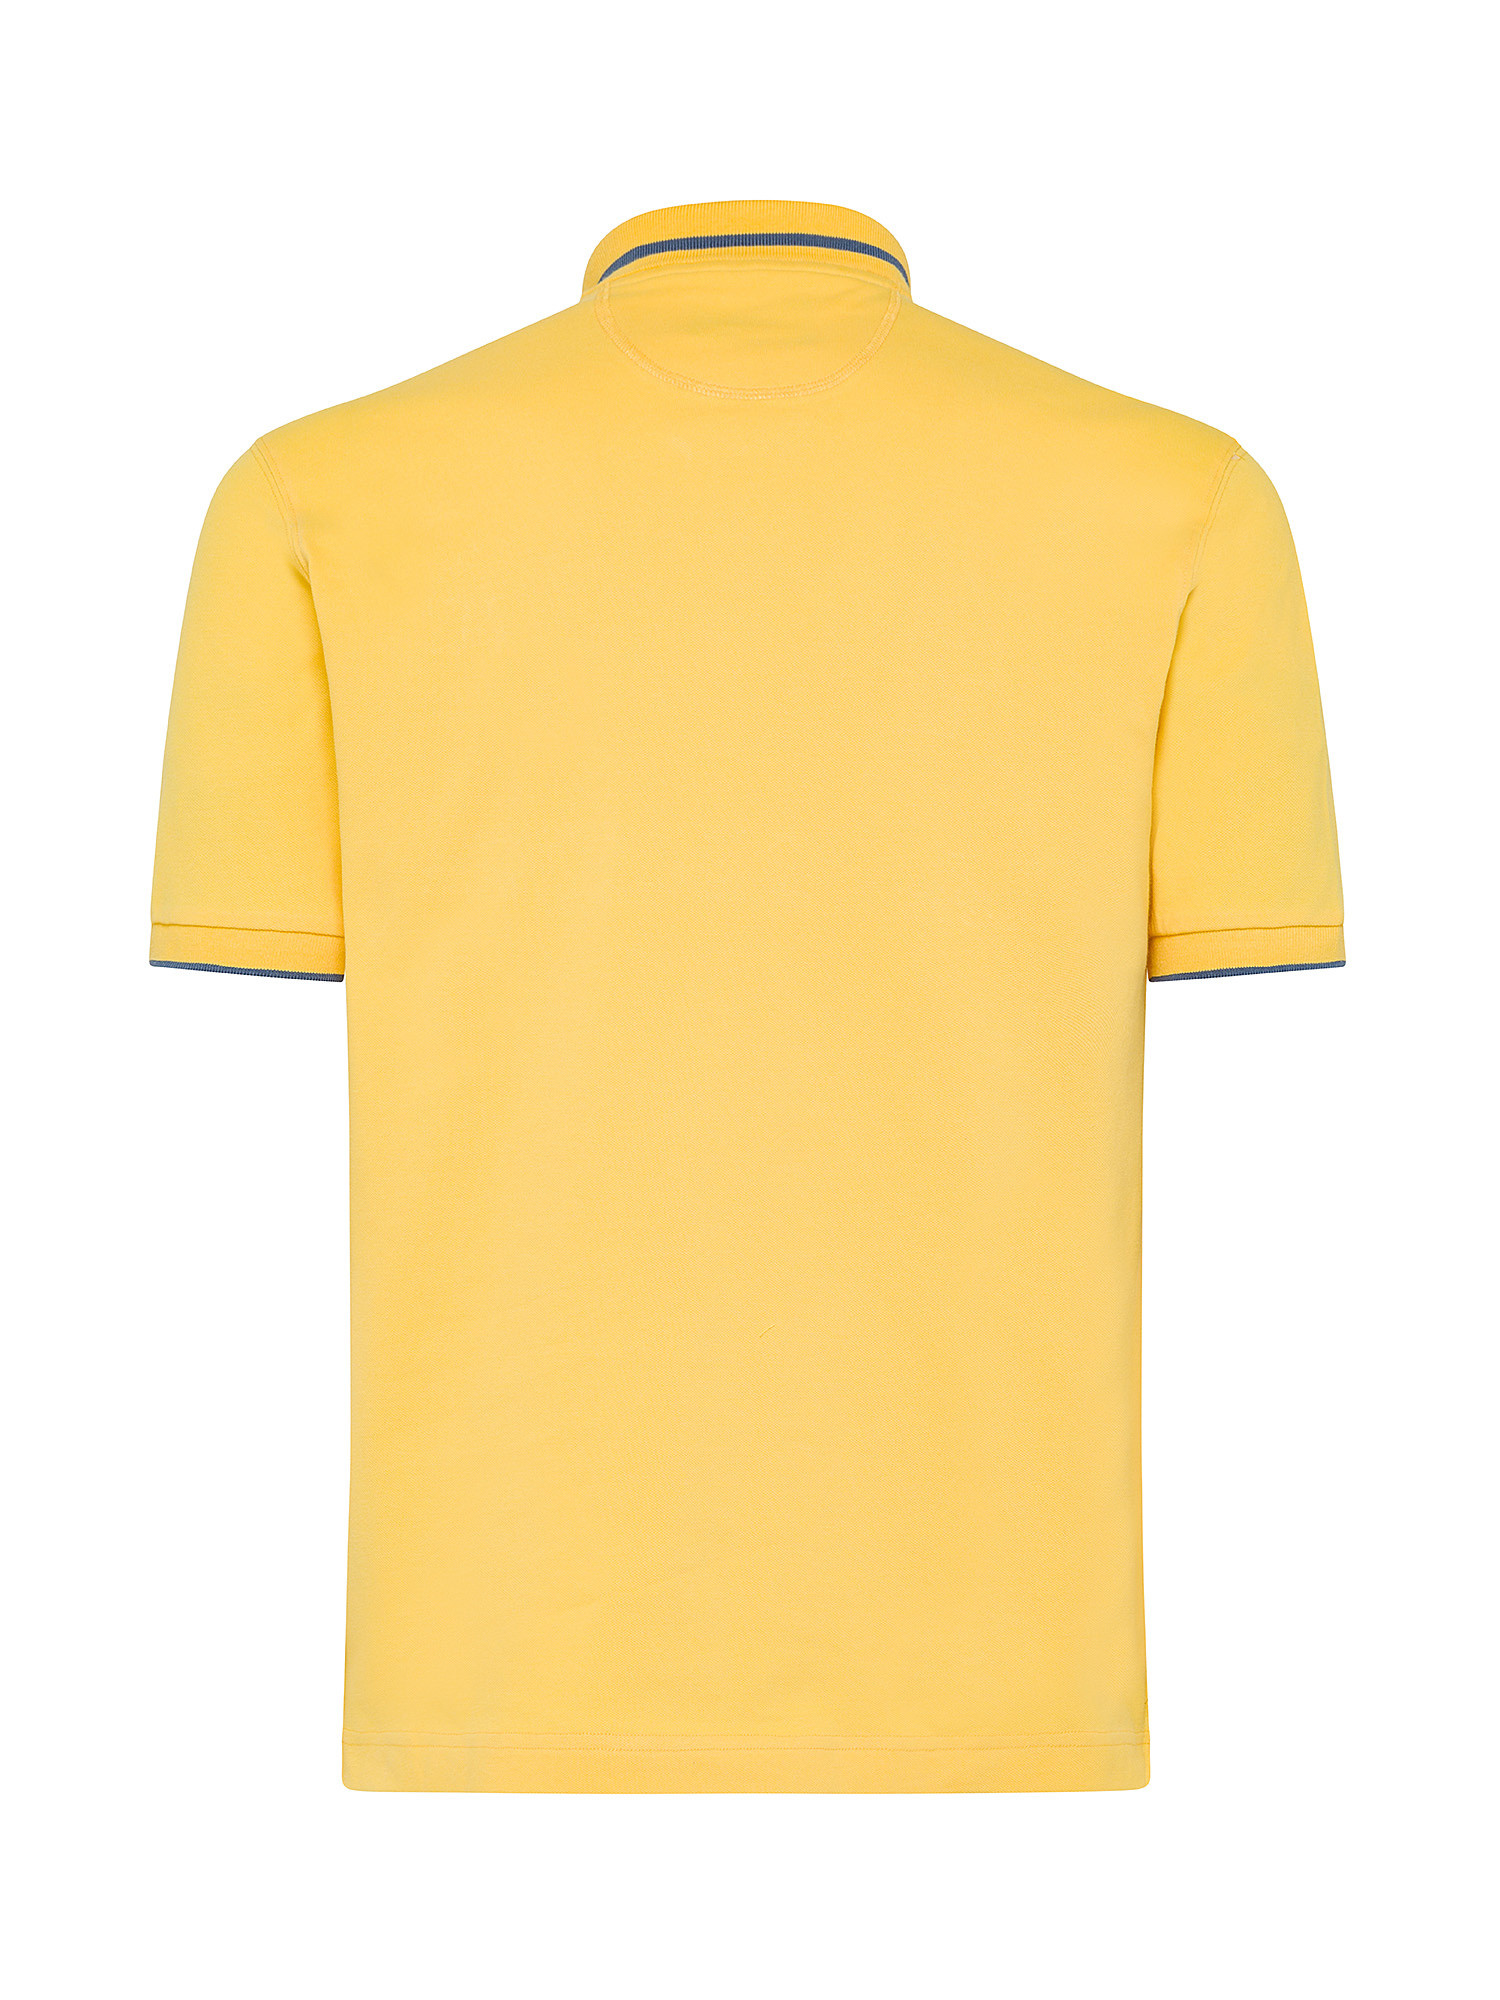 La Martina - Short-sleeved polo shirt in stretch piqué, Yellow, large image number 1